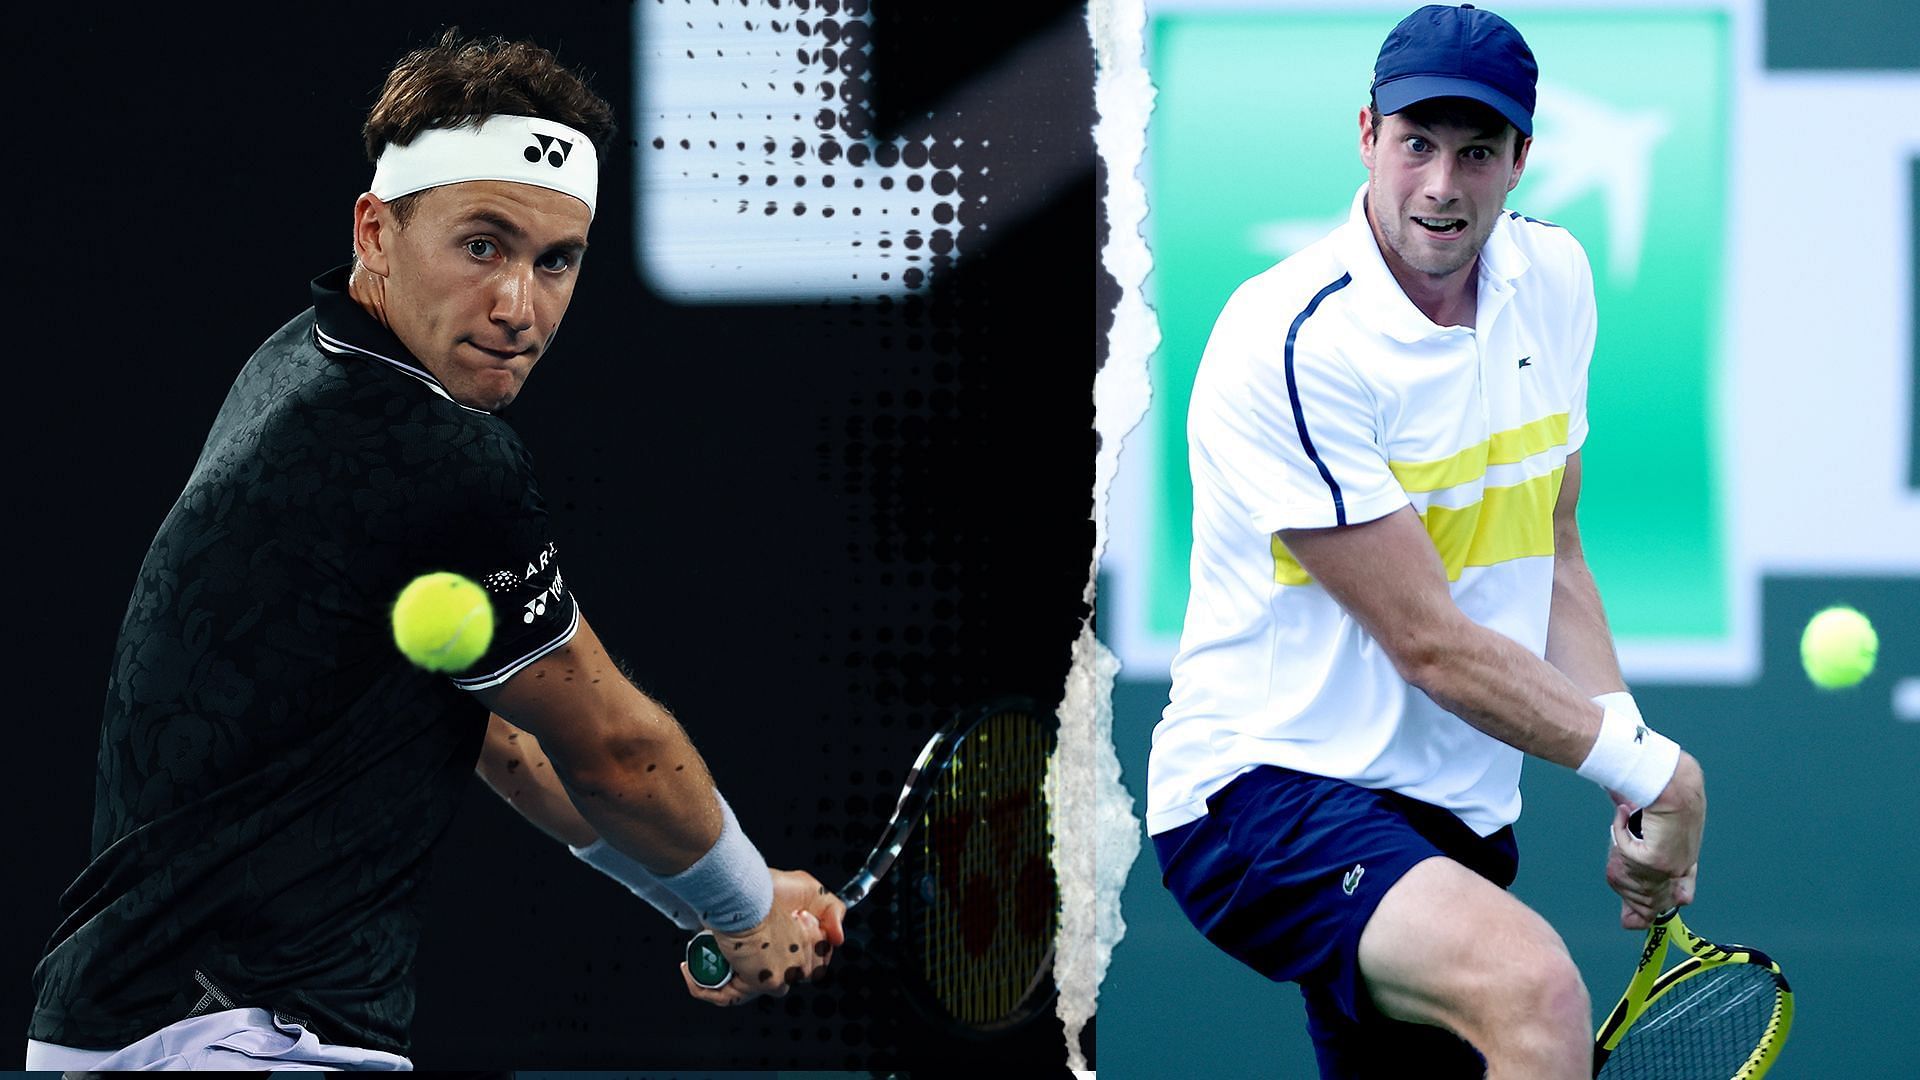 Ruud (left) takes on Zandschulp in Miami on Sunday.